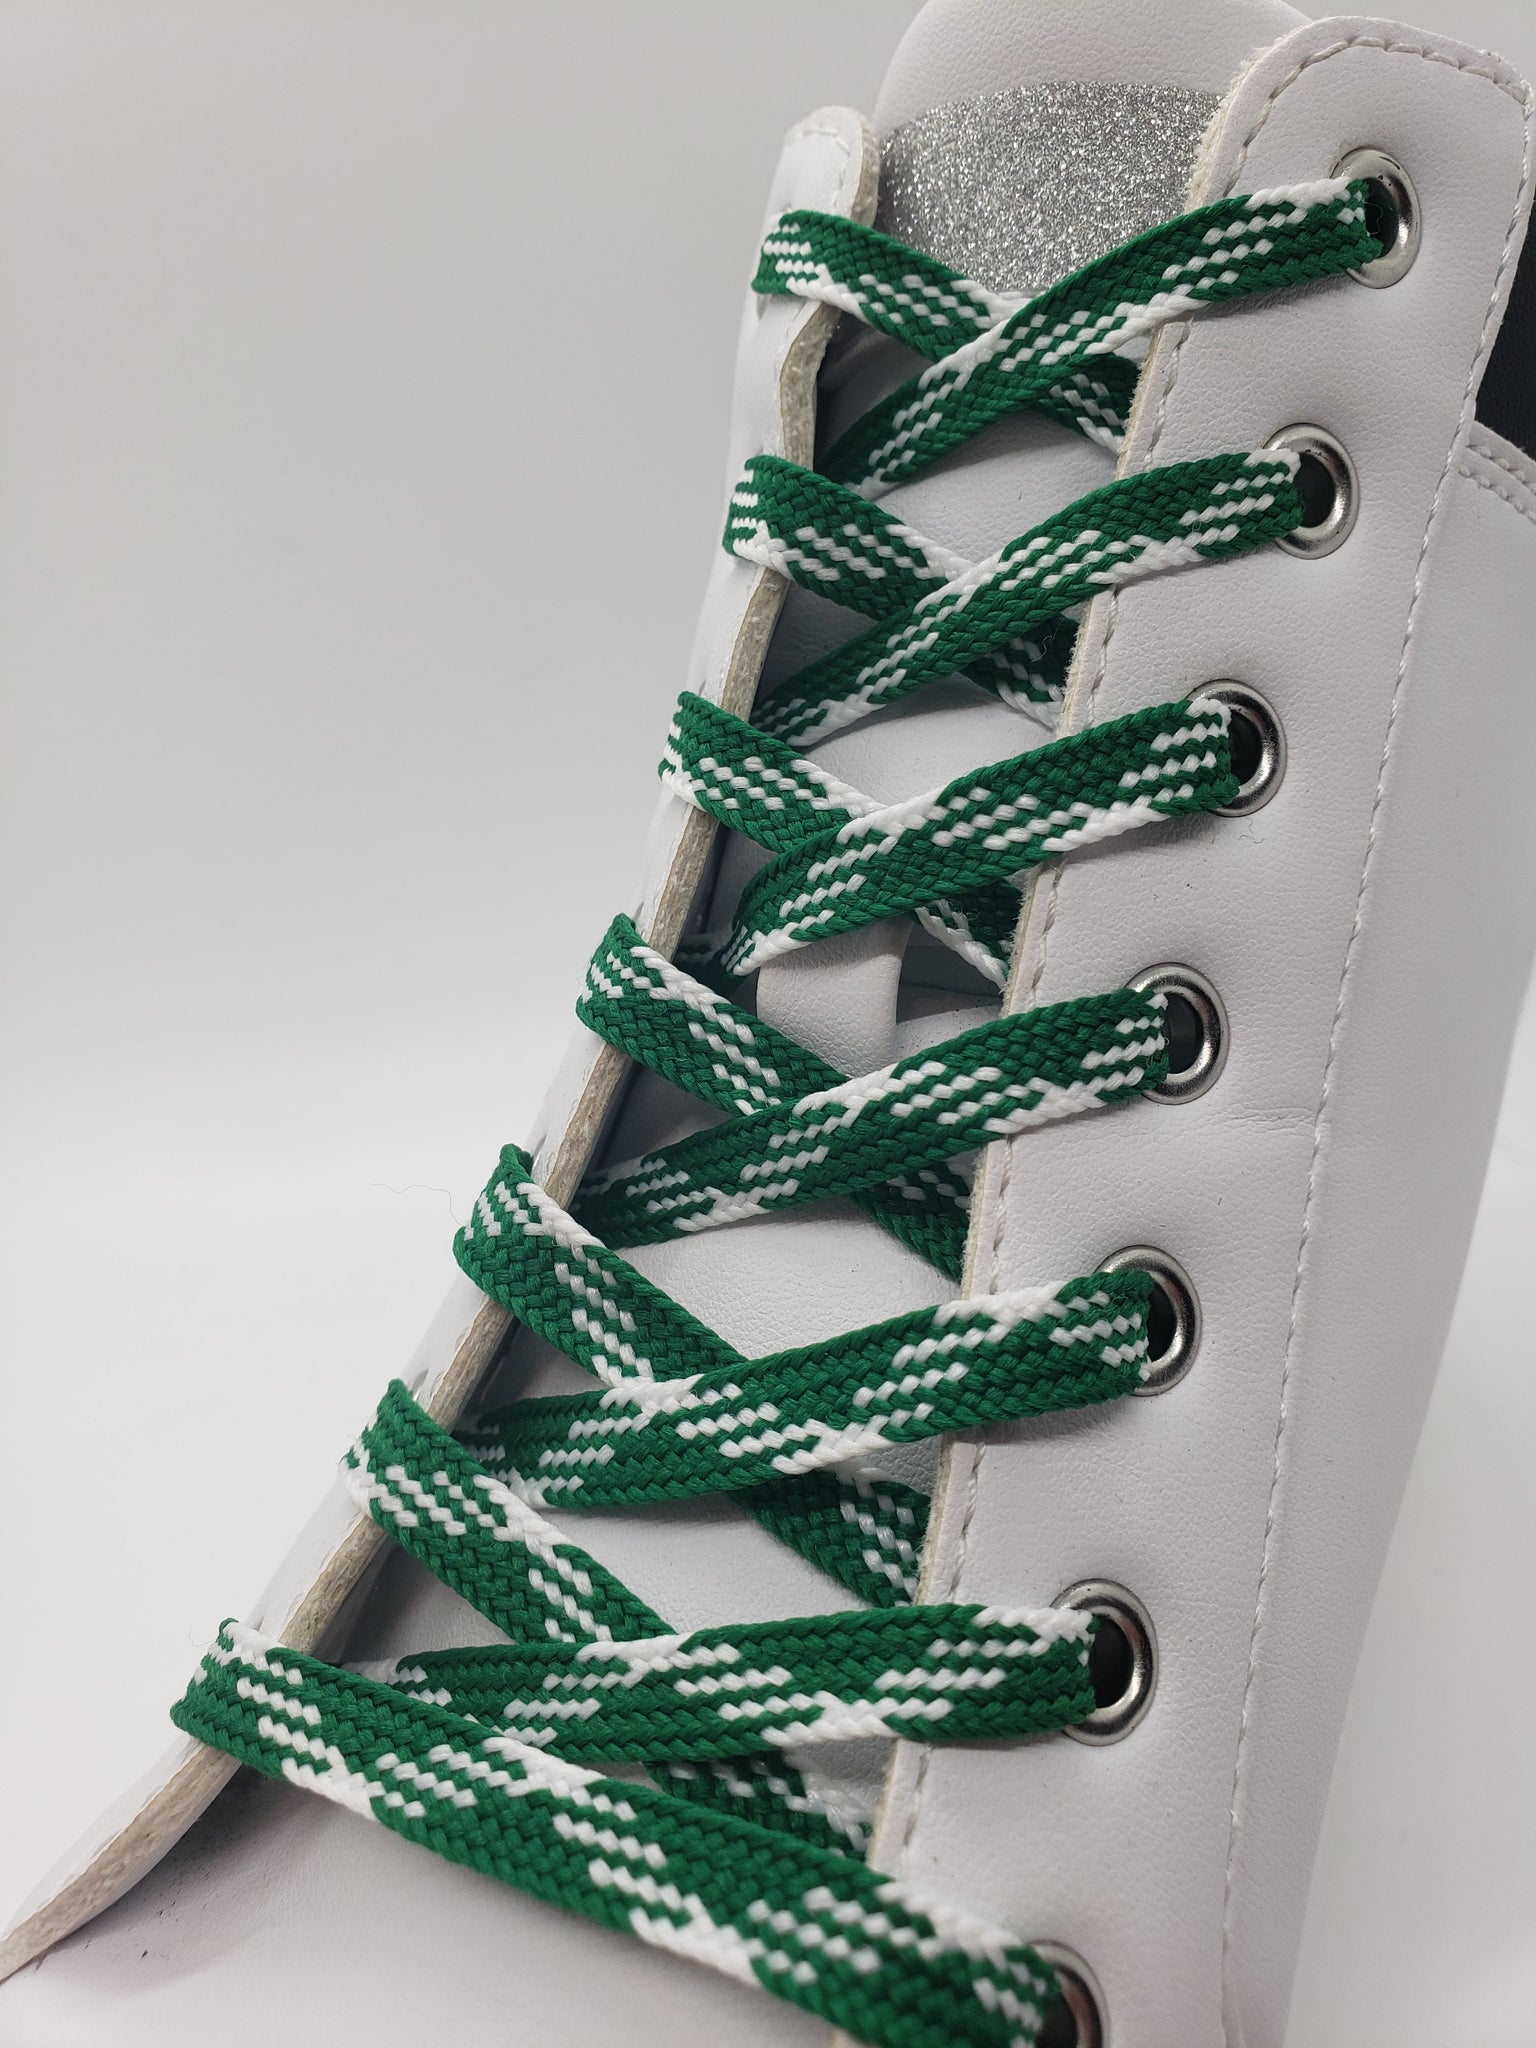 Flat Dress Shoelaces - Green and White